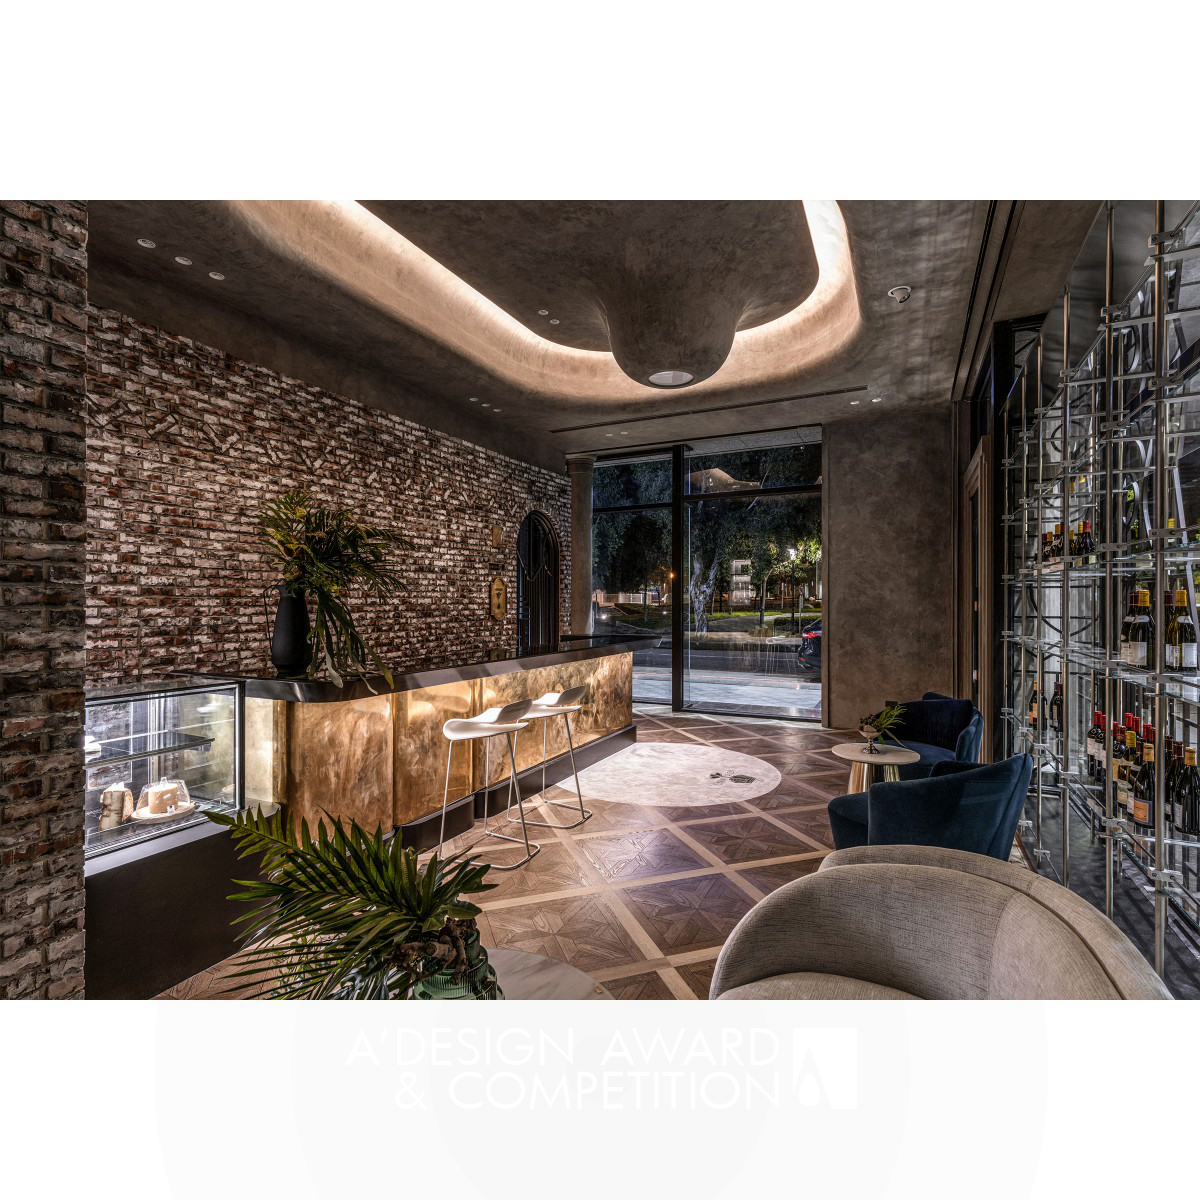 Hsin Ting Weng wins Silver at the prestigious A' Interior Space, Retail and Exhibition Design Award with Champion Wine Cave.